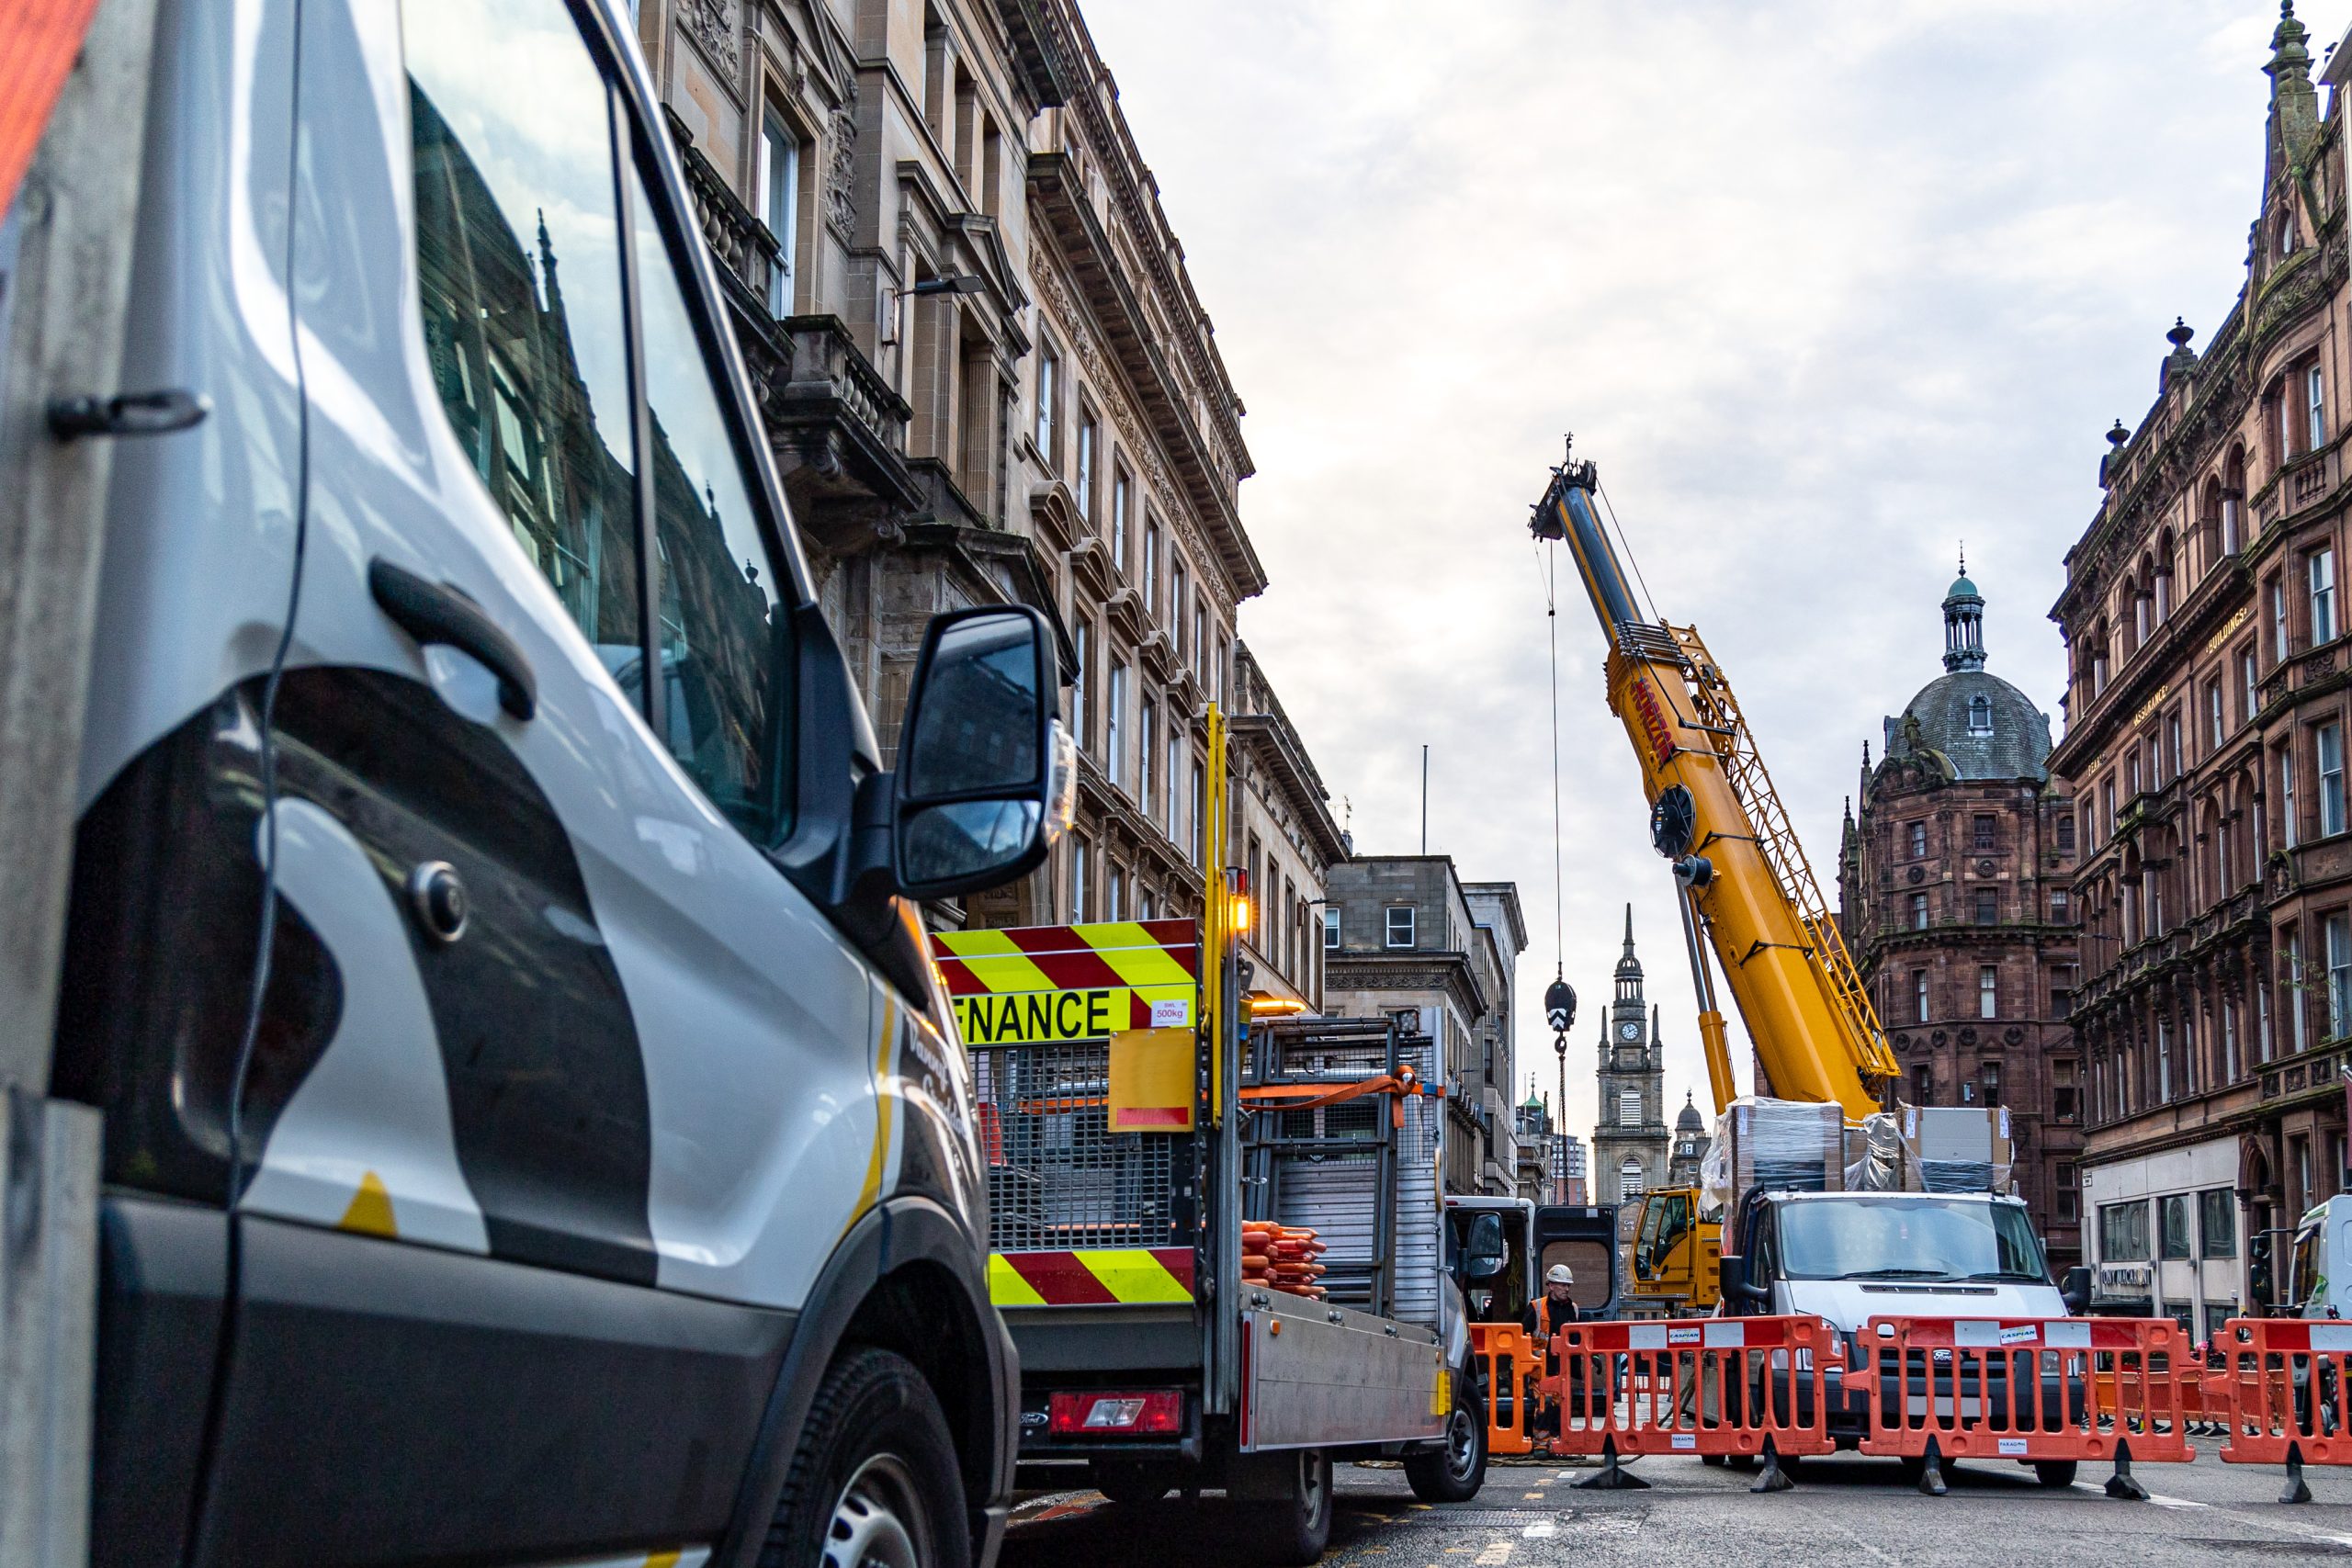 Crane working within work site set up by Paragon traffic management in Scotland